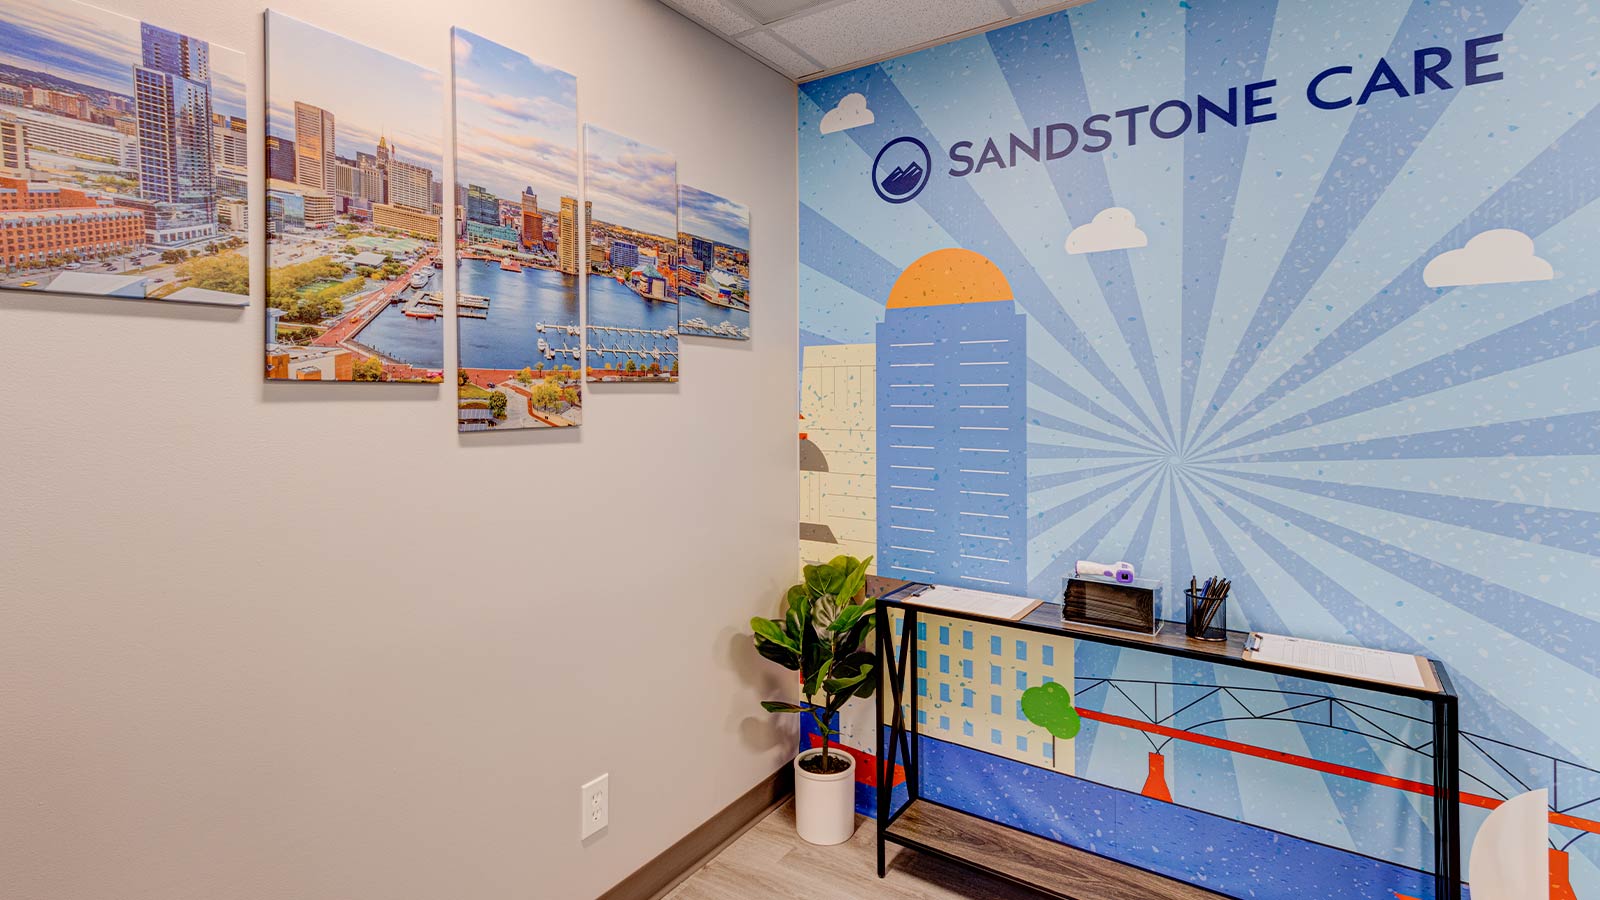 A cheerful corner of an office decorated with a mural displaying the branding "SANDSTONE CARE" prominently on the wall.